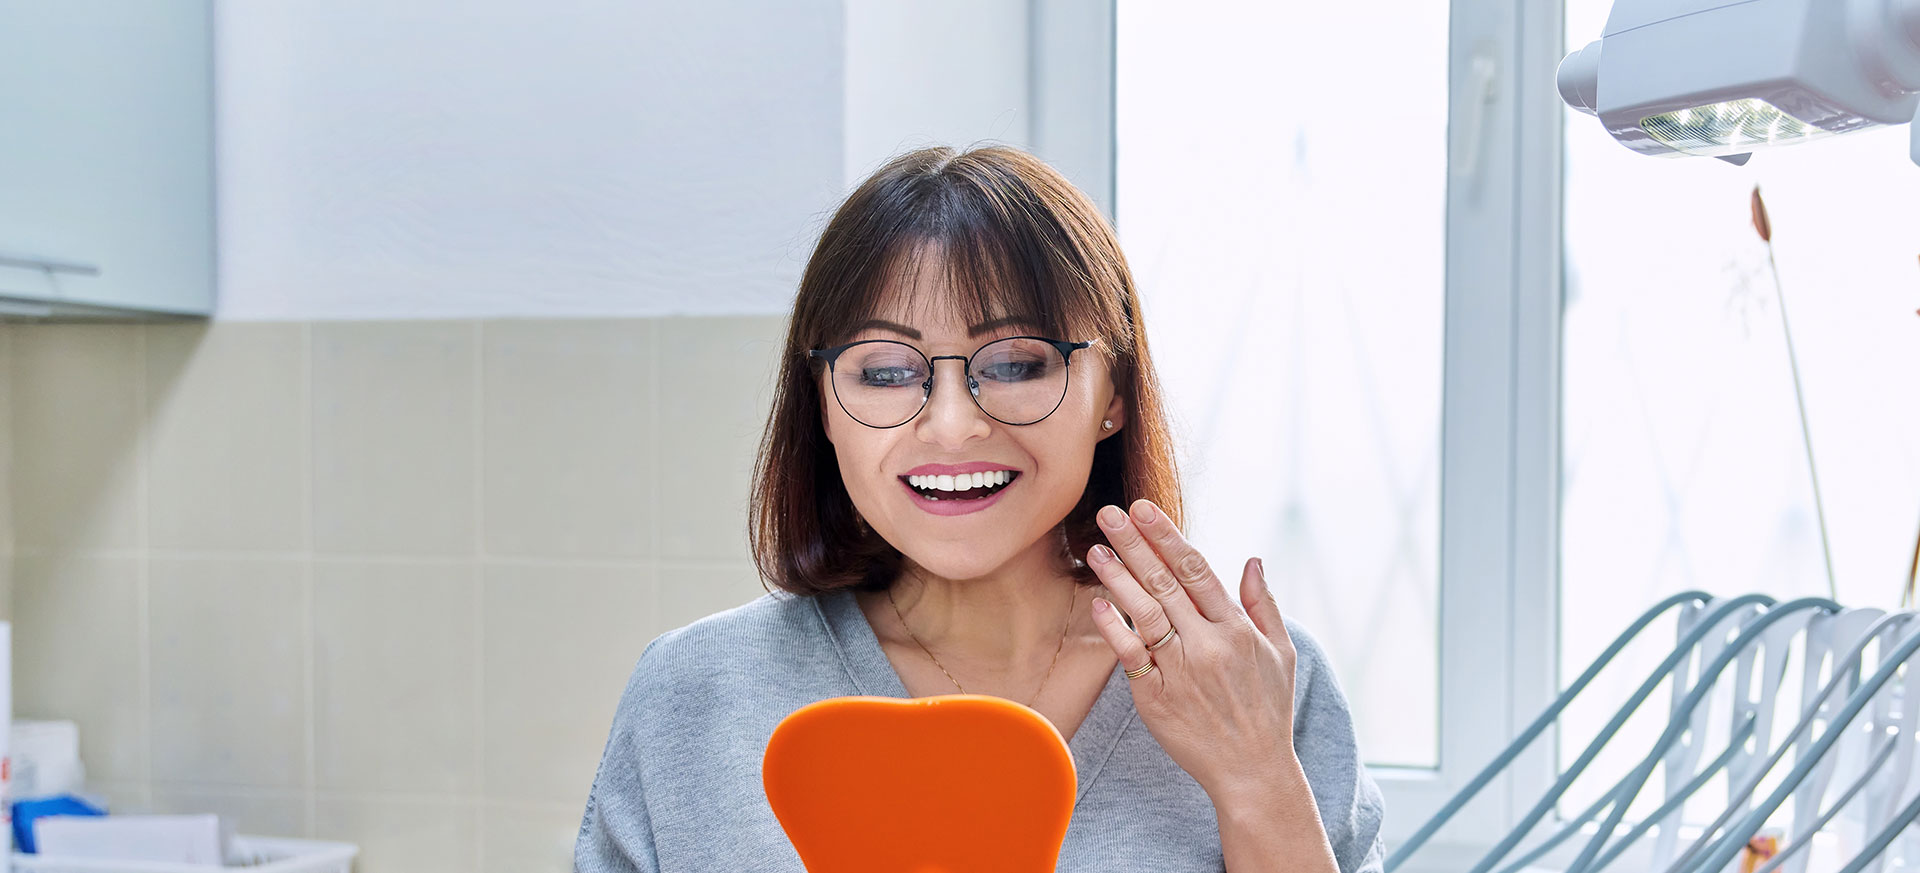 The image shows a woman with glasses, smiling and looking at her phone screen while standing in a kitchen environment.